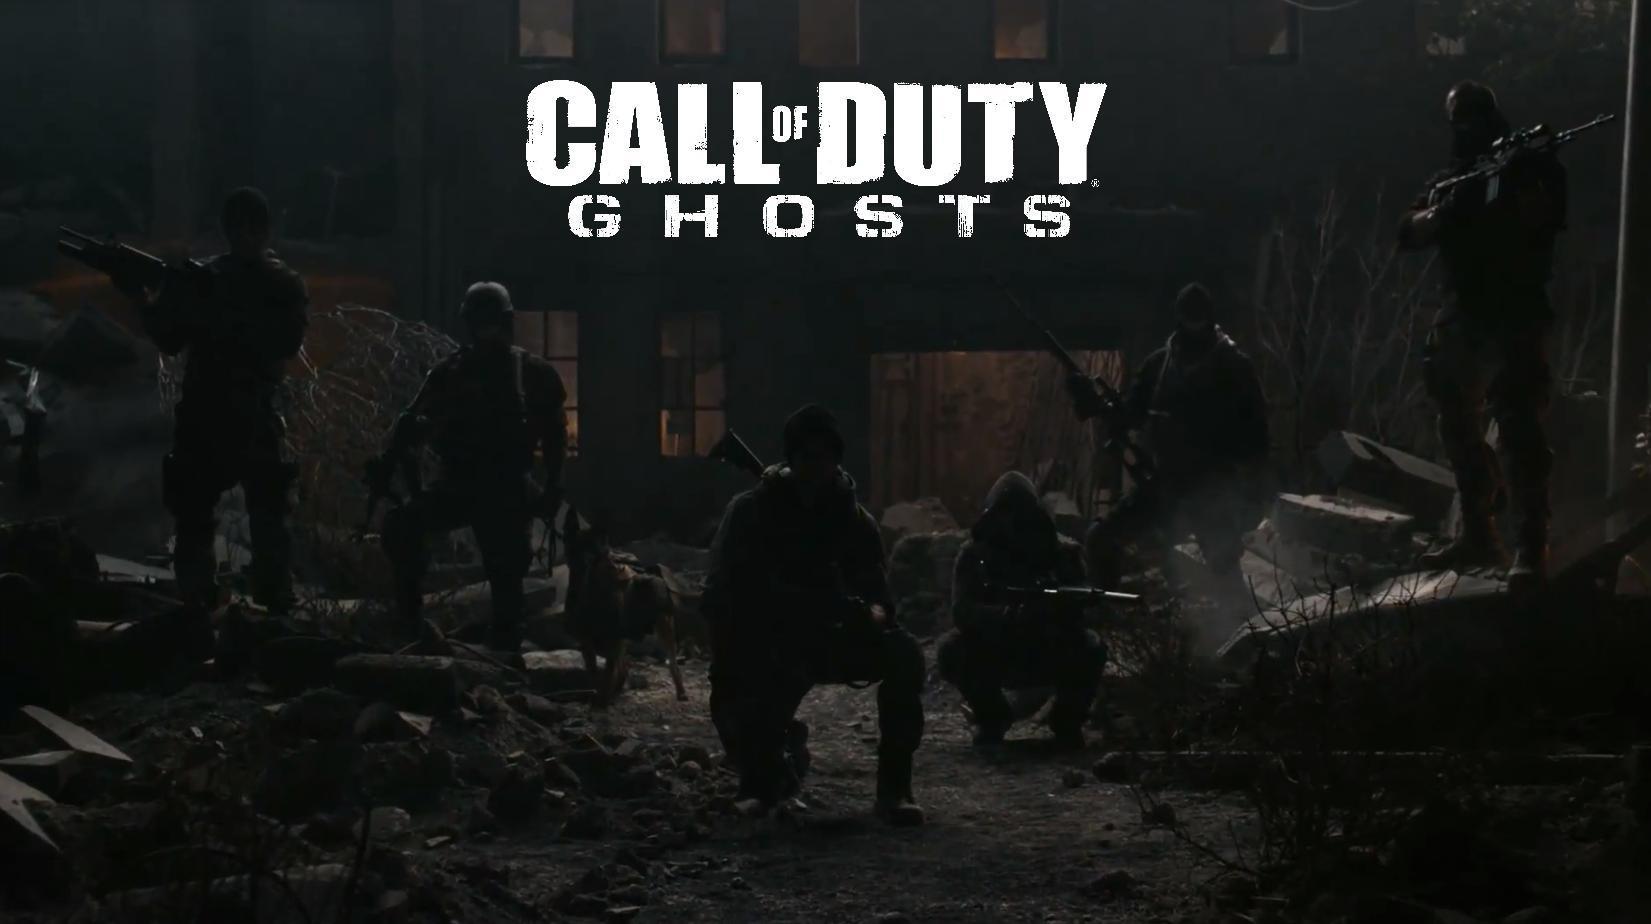 call of duty ghosts HD wallpaper. High Quality Wallpaper